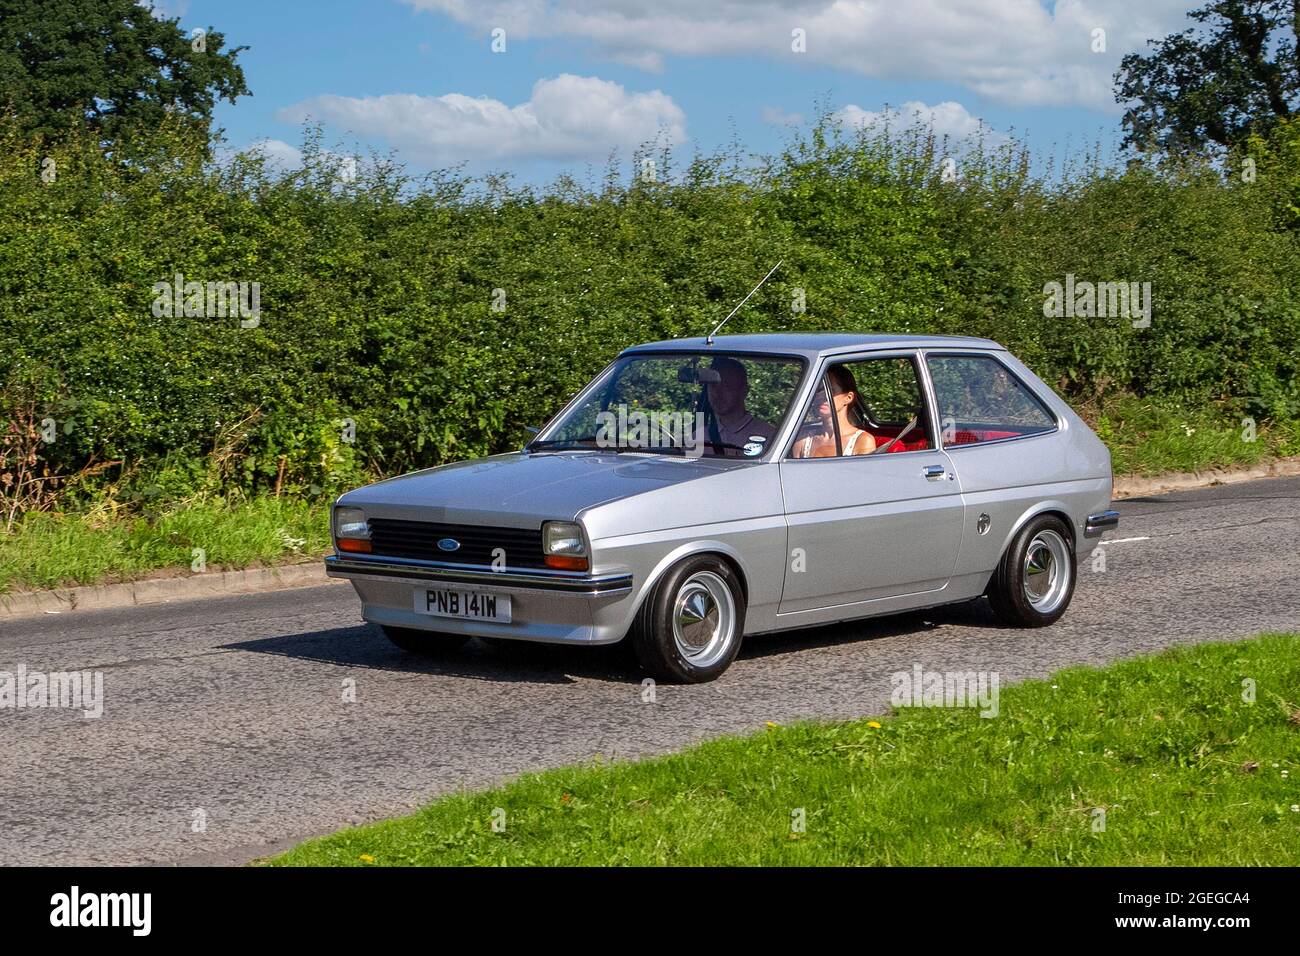 A front view of 1981 1980s 80s Petrol Silver Ford Fiesta L Hatchback vintage classic car retro driver vehicle automobile Stock Photo